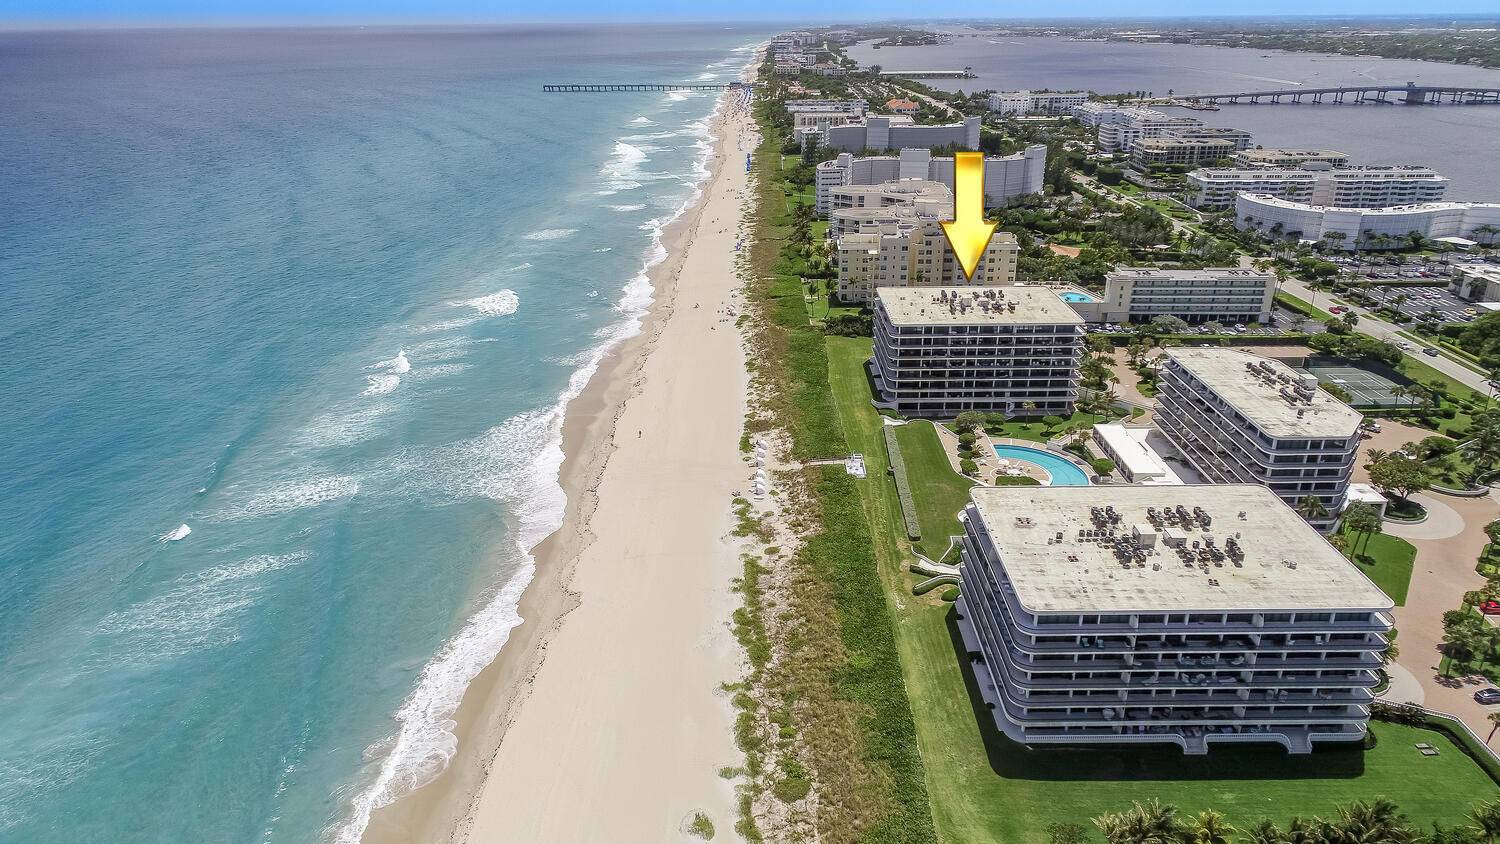 DIRECT OCEANFRONT at Luxury Beach Point Palm Beach, FL 2137 sqft and steps to the beach 2 bedrooms 2.